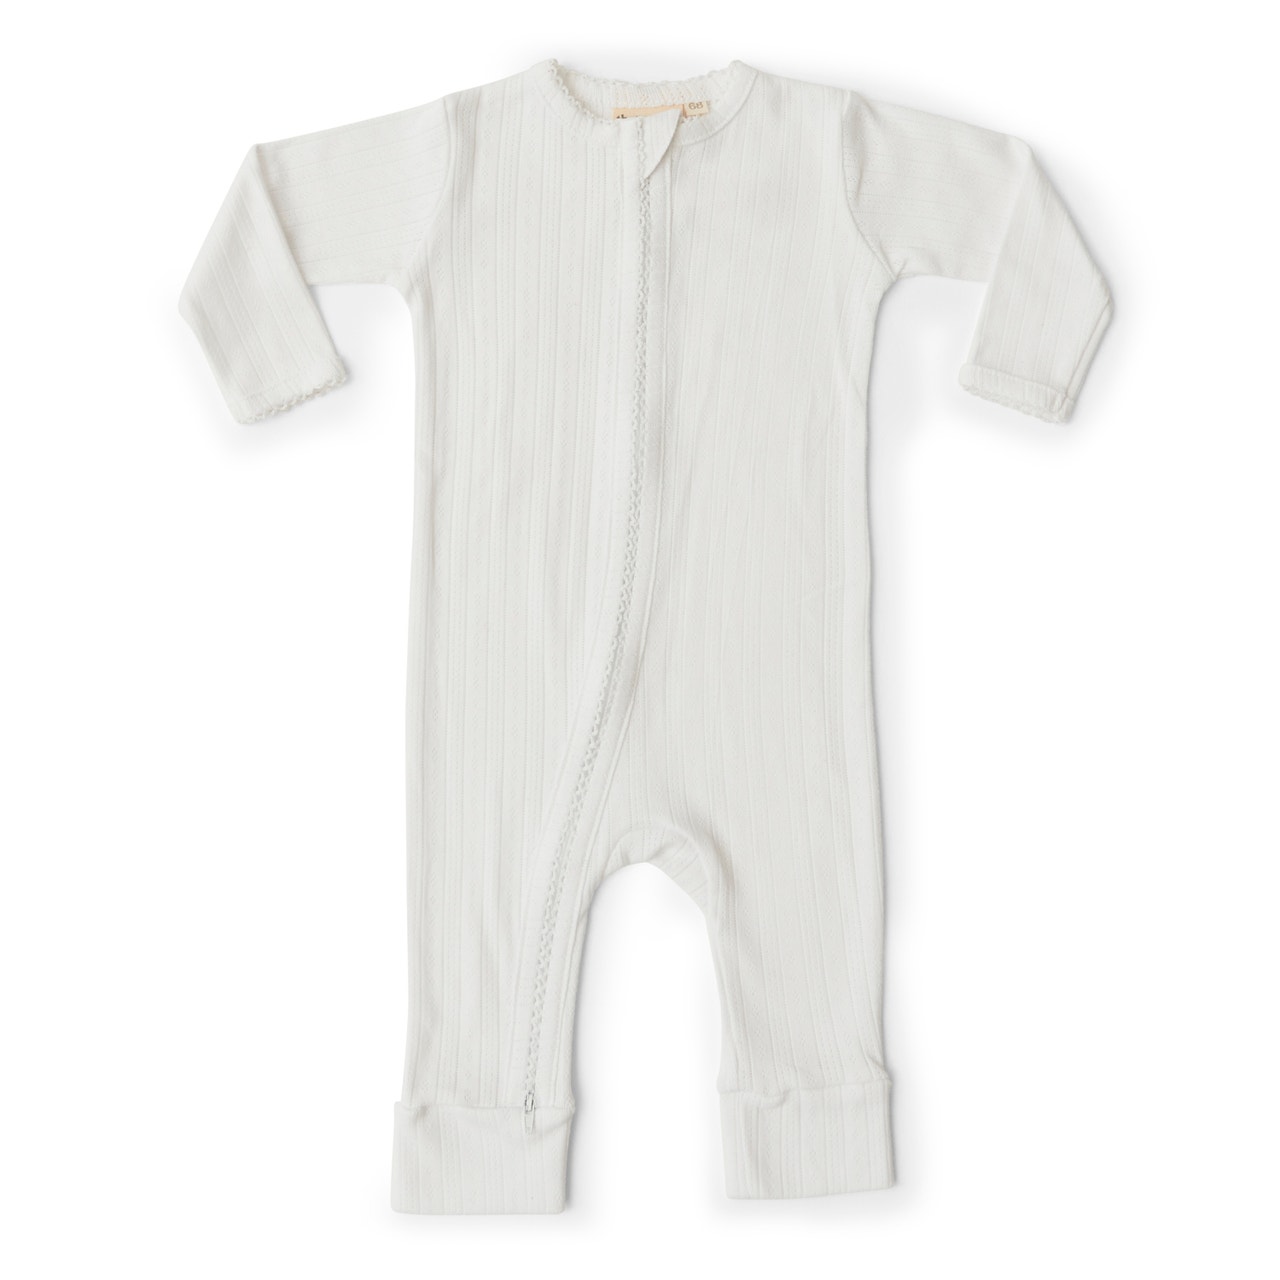 MAMA.LICIOUS Baby-heldress -Antique White - 88888866